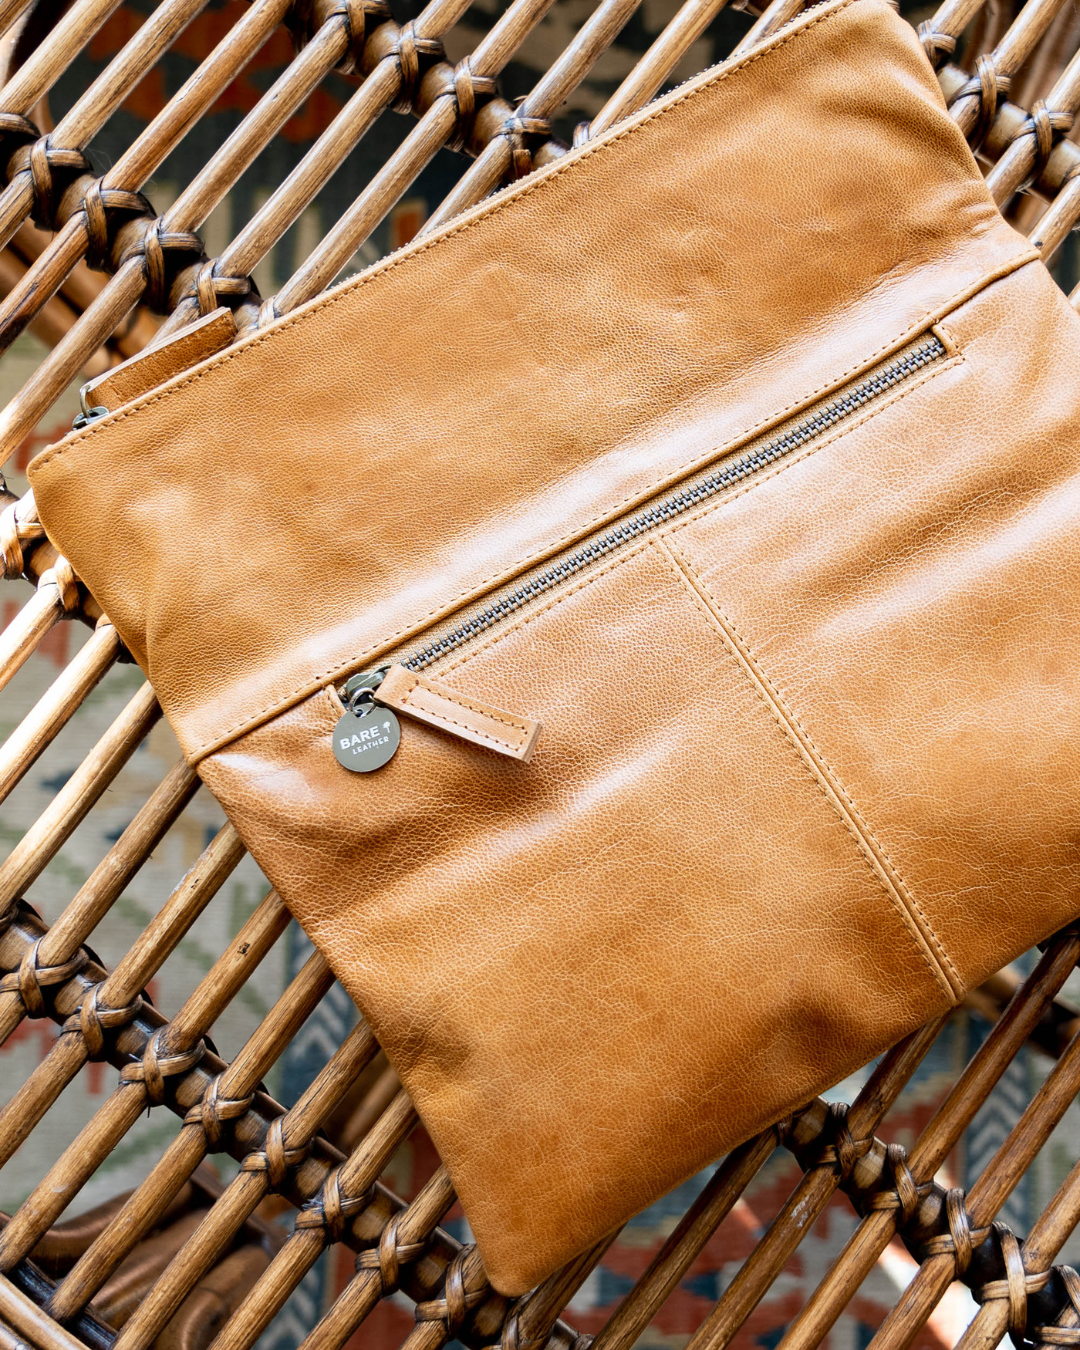 Foldover Clutch - BARE Leather